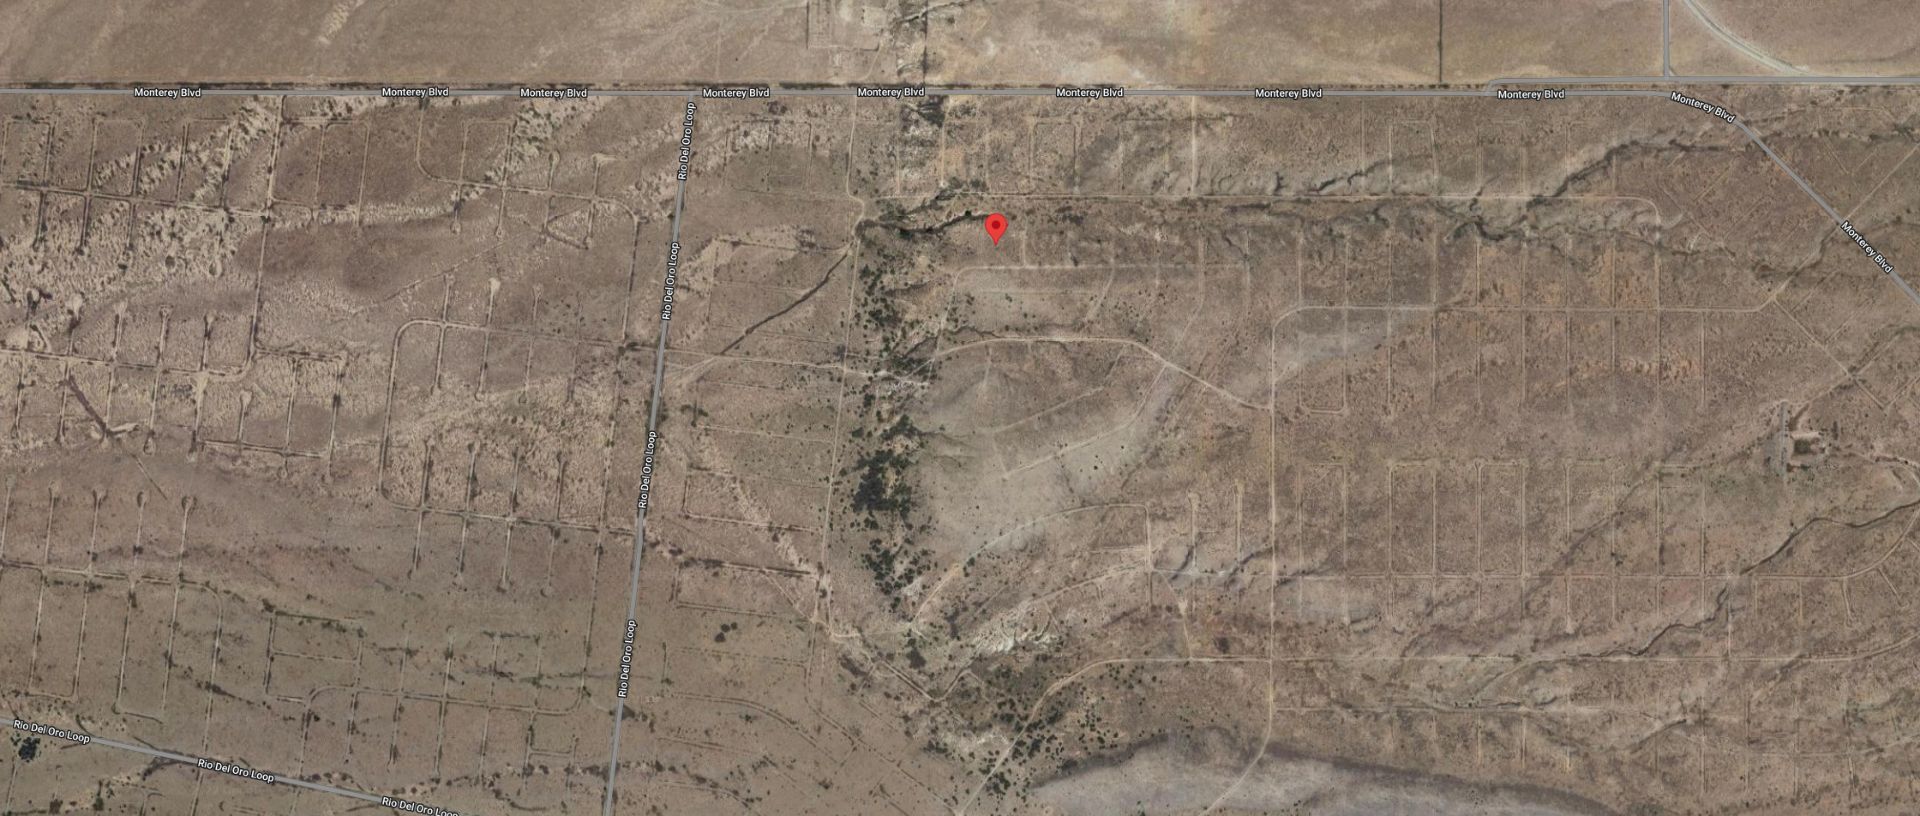 Half-Acre Lot Near the Mountains in New Mexico! - Image 11 of 16